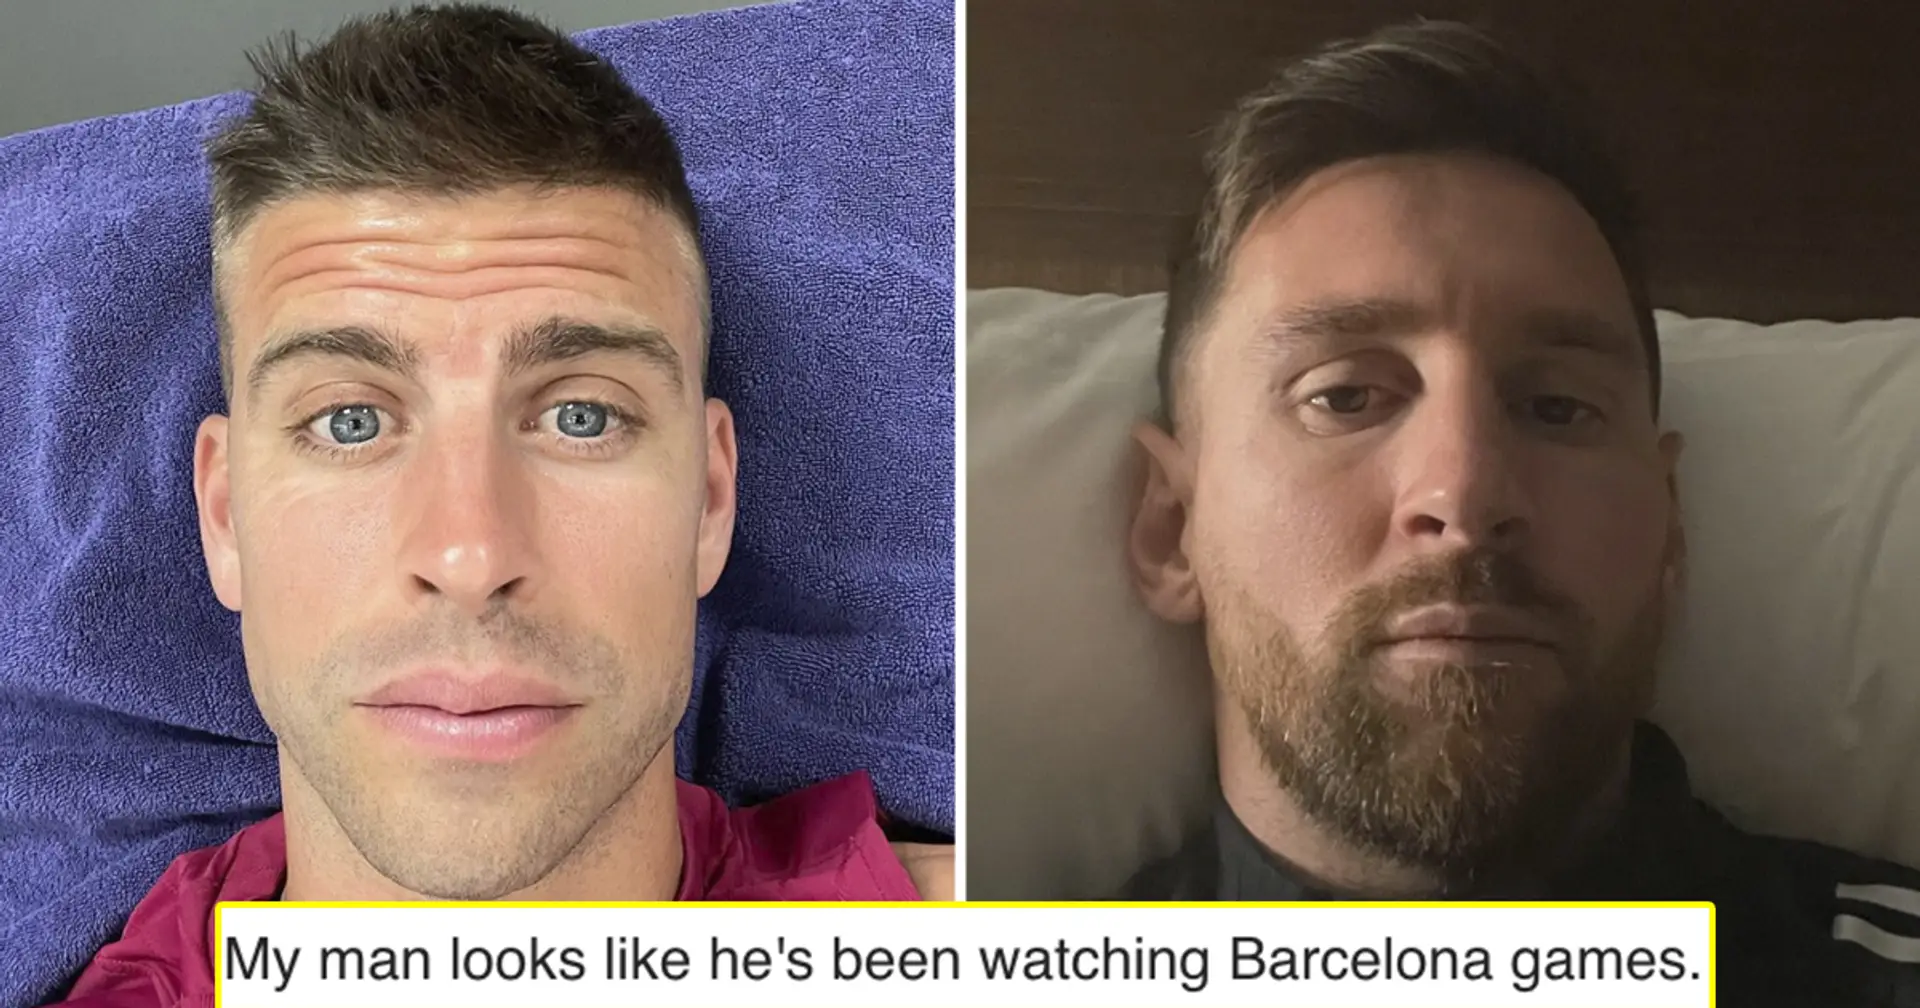 'Pique effect': Global fans react as Messi uploads probably his first-ever selfie pic